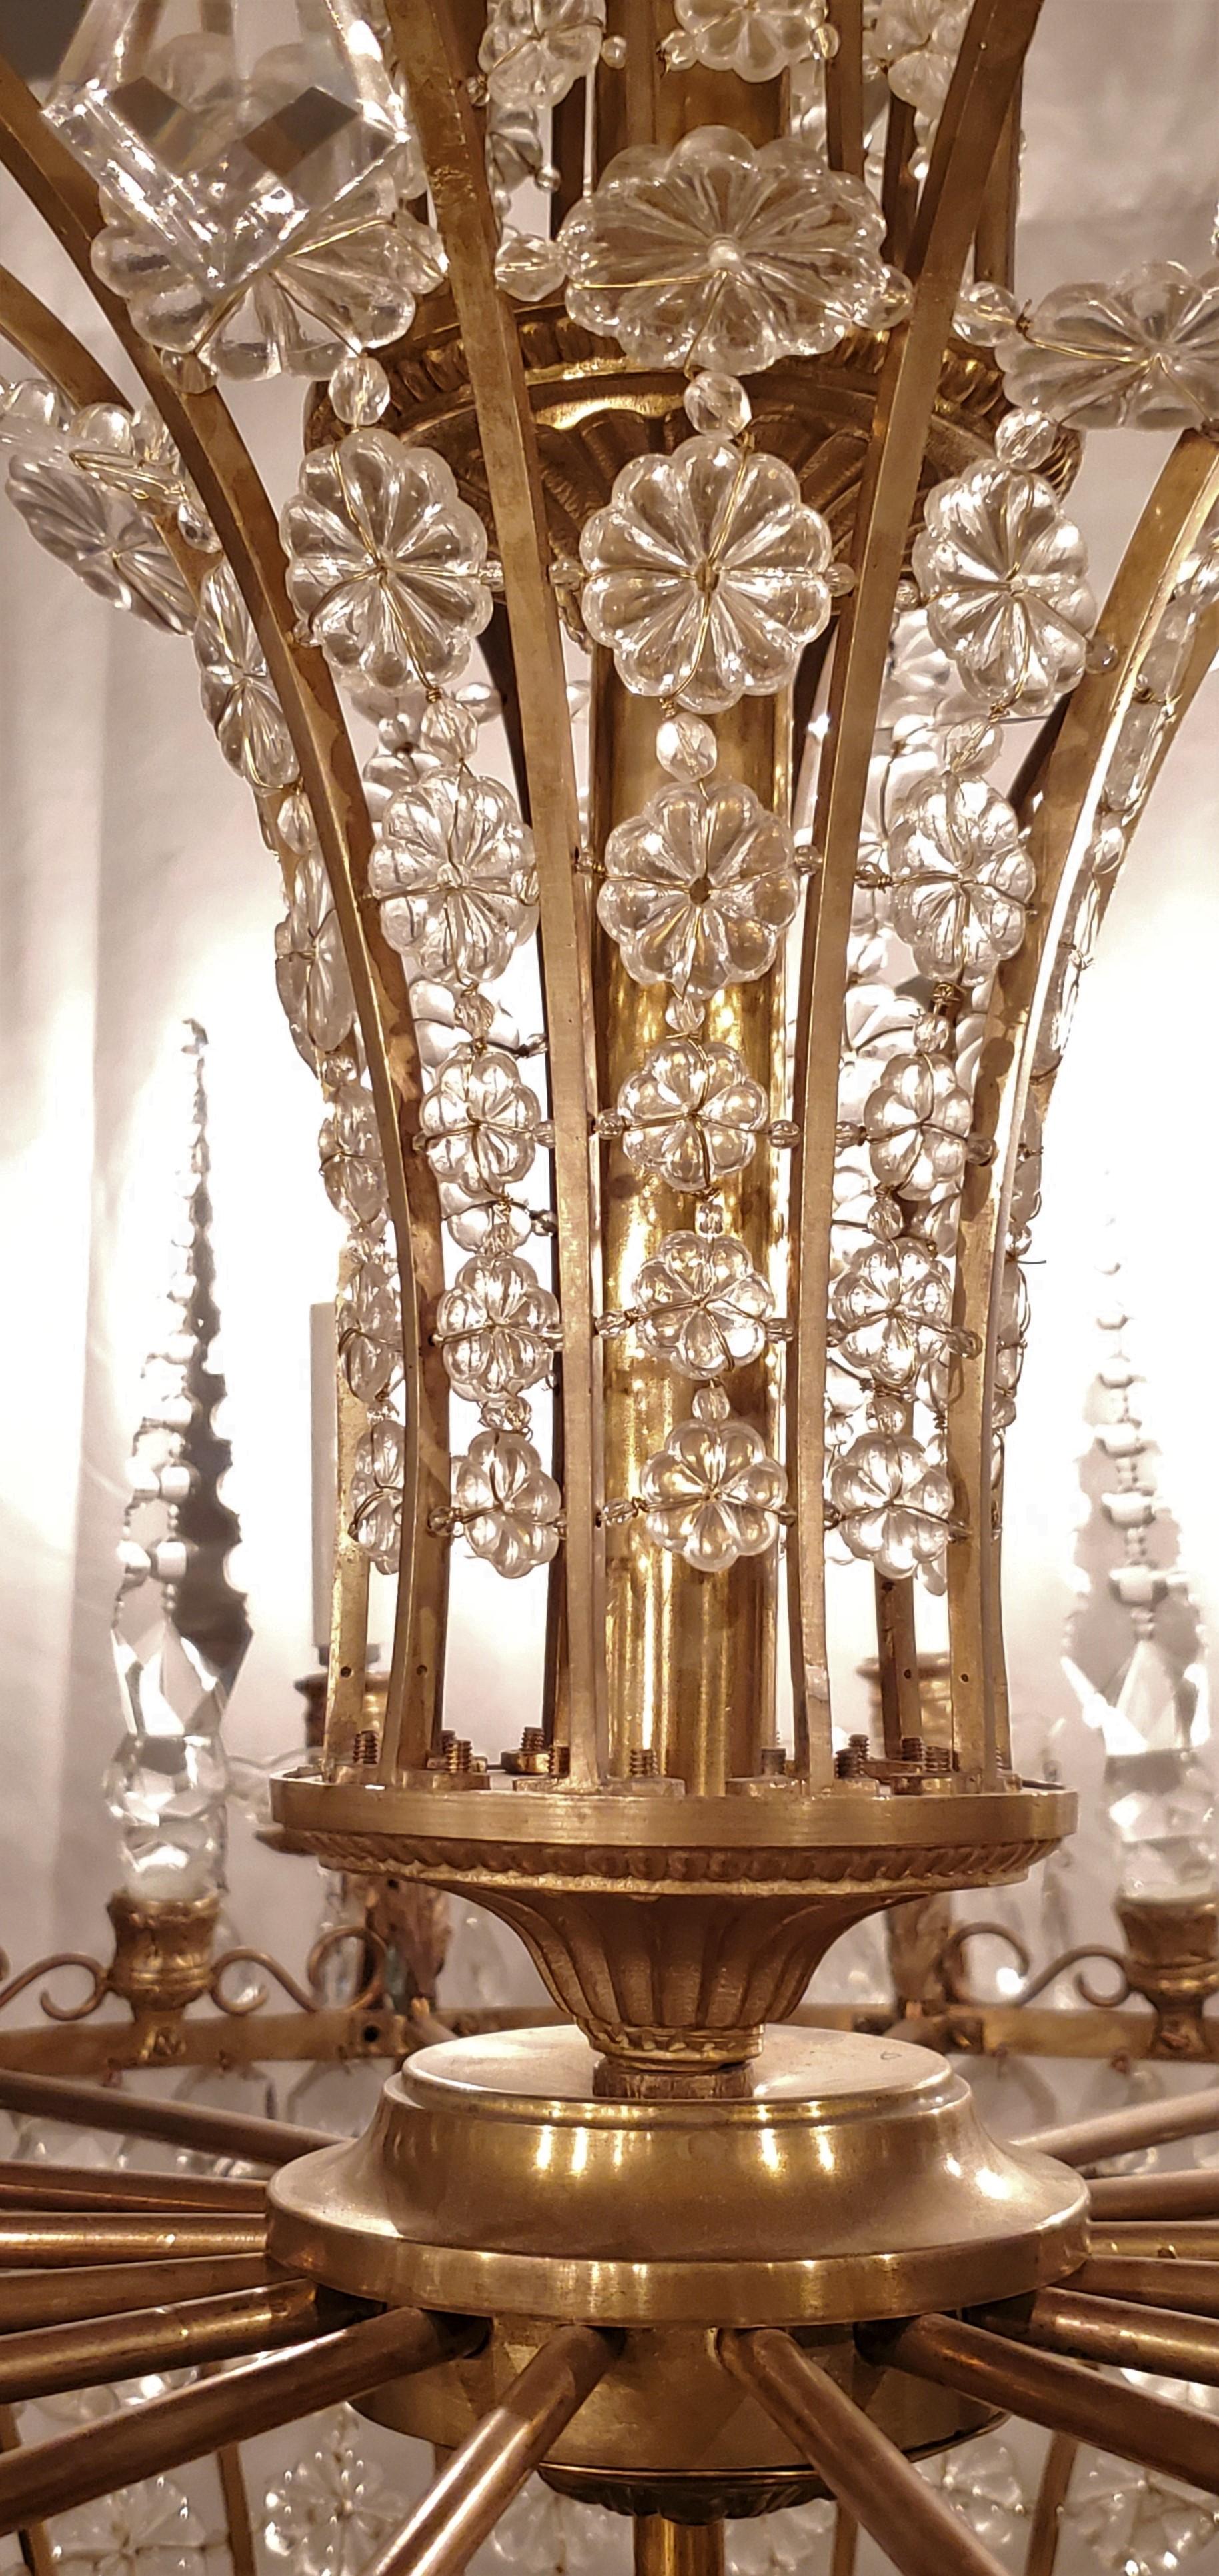 Antique French Parisian Belle Époque Empress Eugenie Crystal Chandelier In Good Condition For Sale In New Orleans, LA